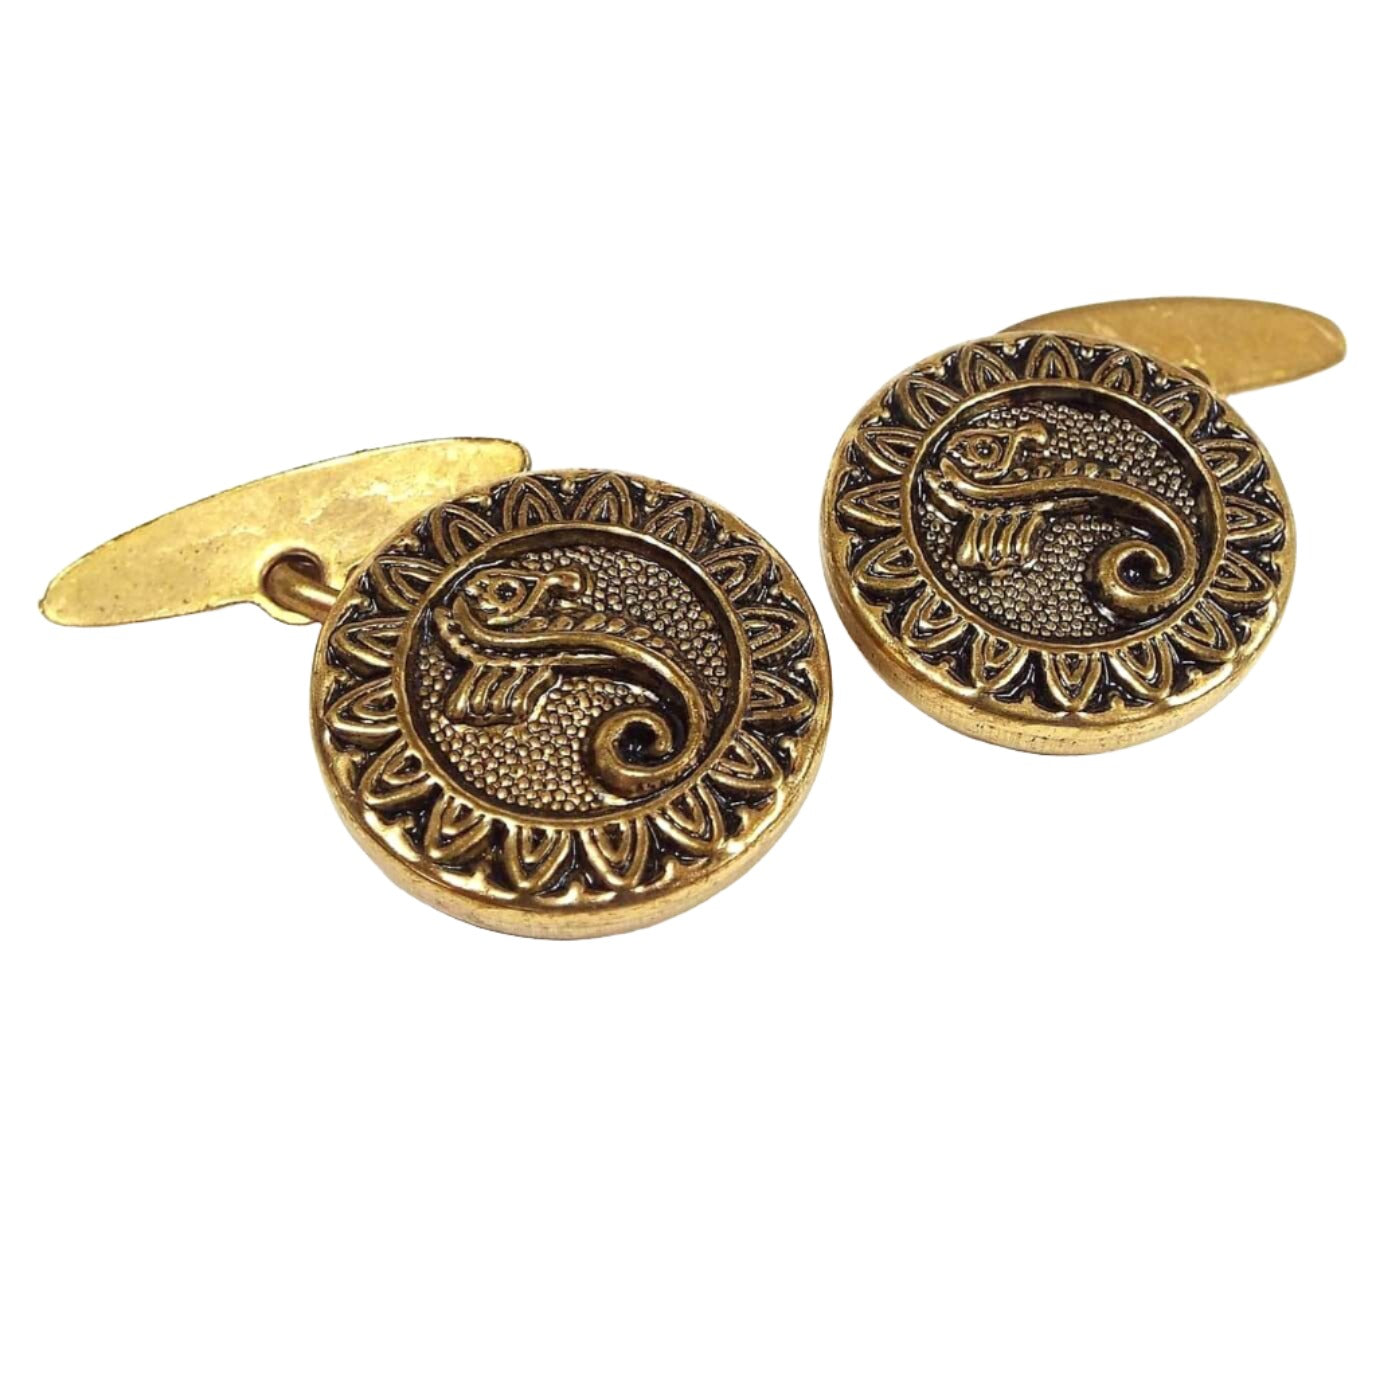 Front view of the Mid Century vintage button cufflinks. The metal is antiqued brass color. The fronts are round with a textured and raised seahorse and sunflower design. The backs are oval held with a link between the front and back.